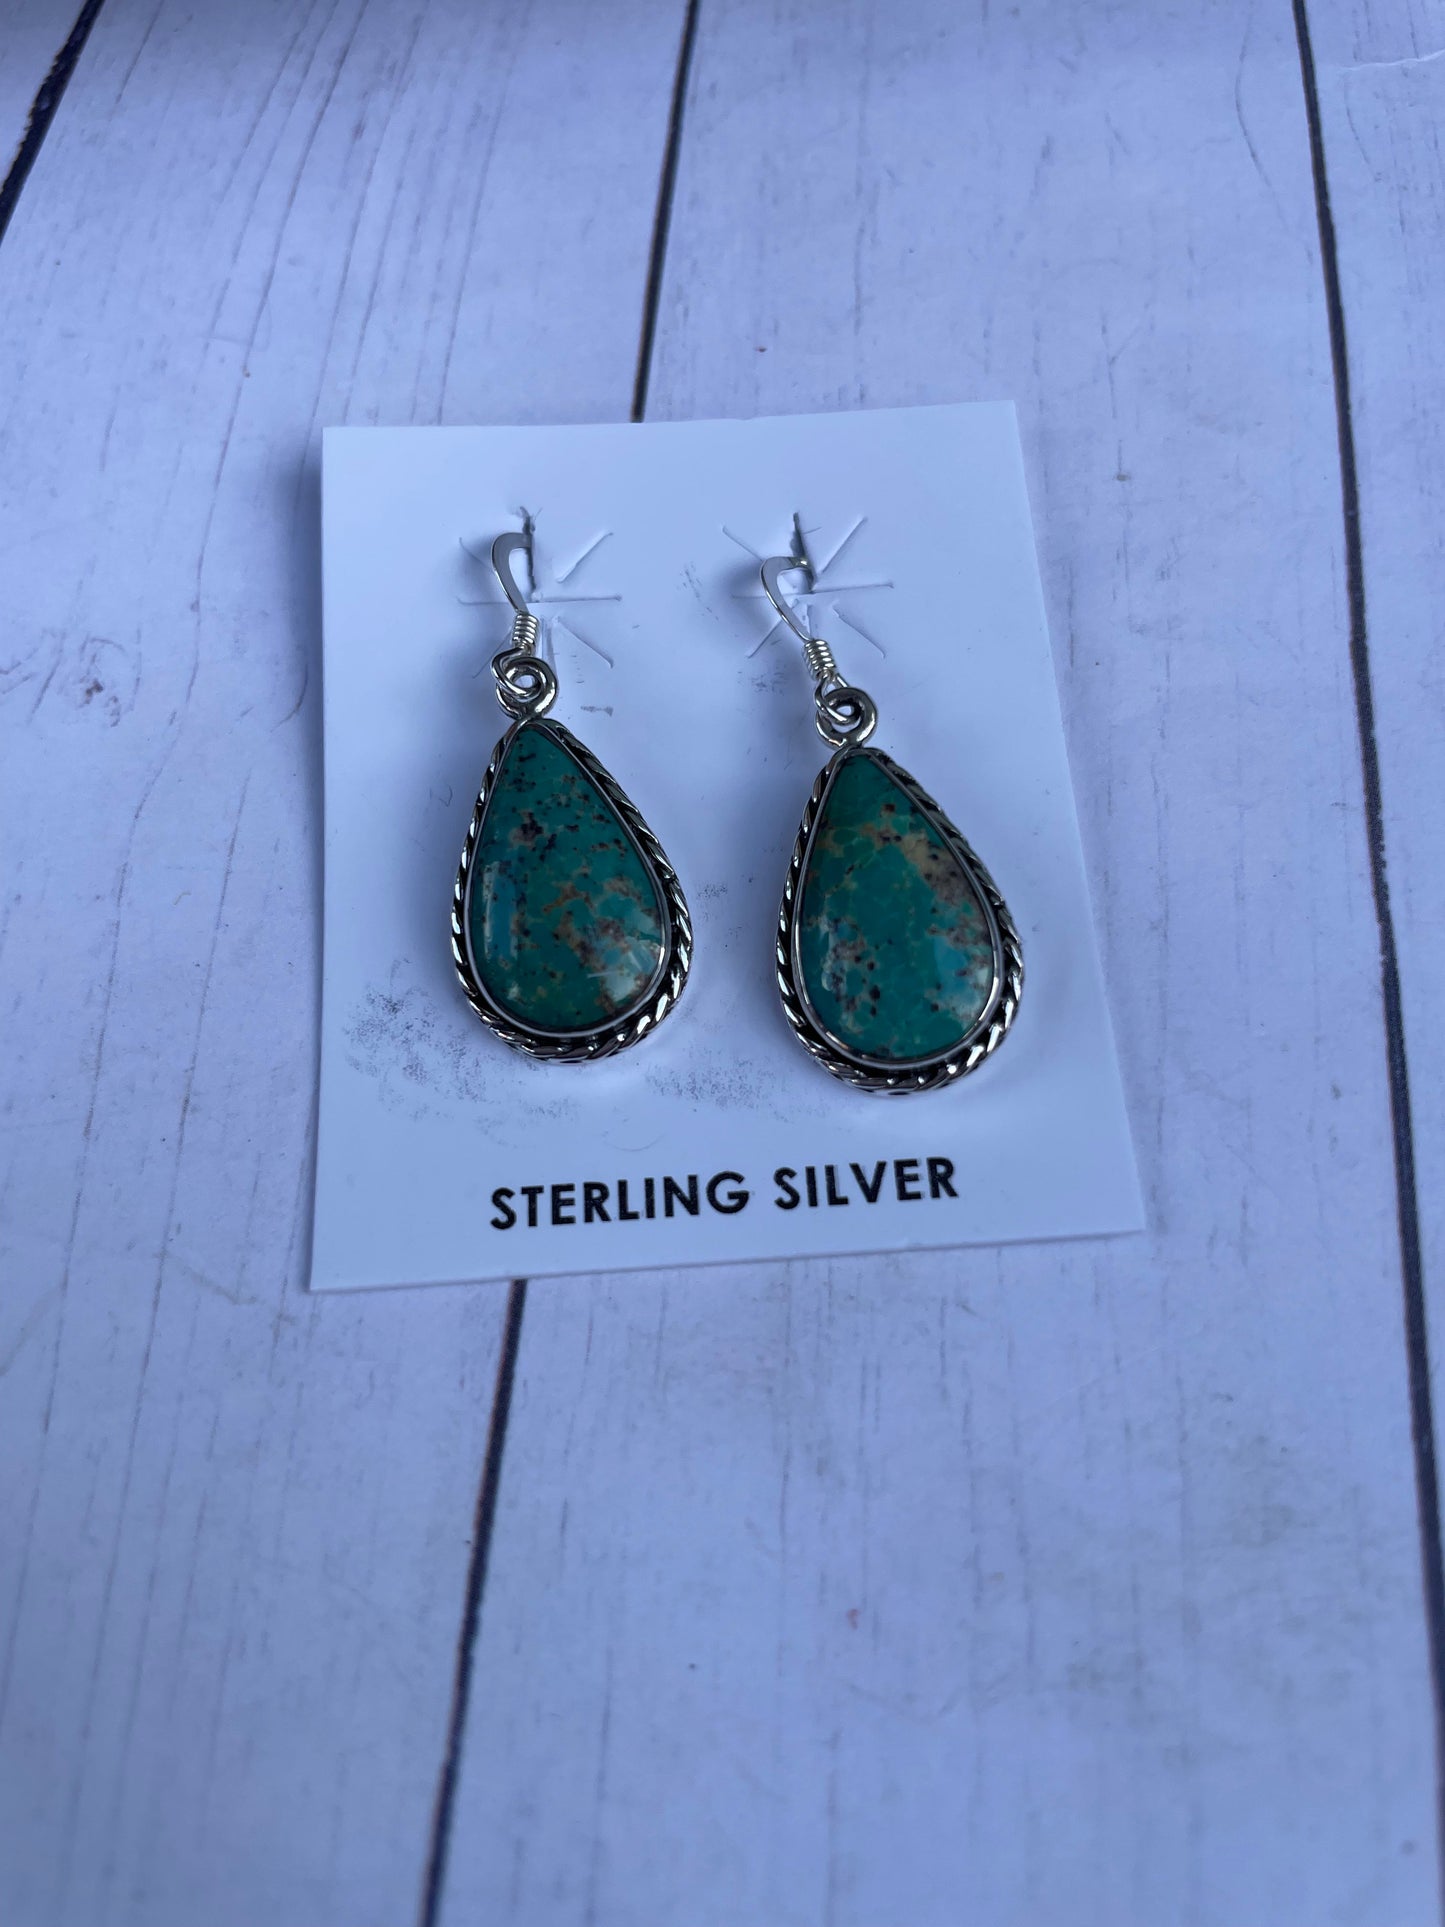 Navajo Turquoise And Sterling Silver Dangle Earrings